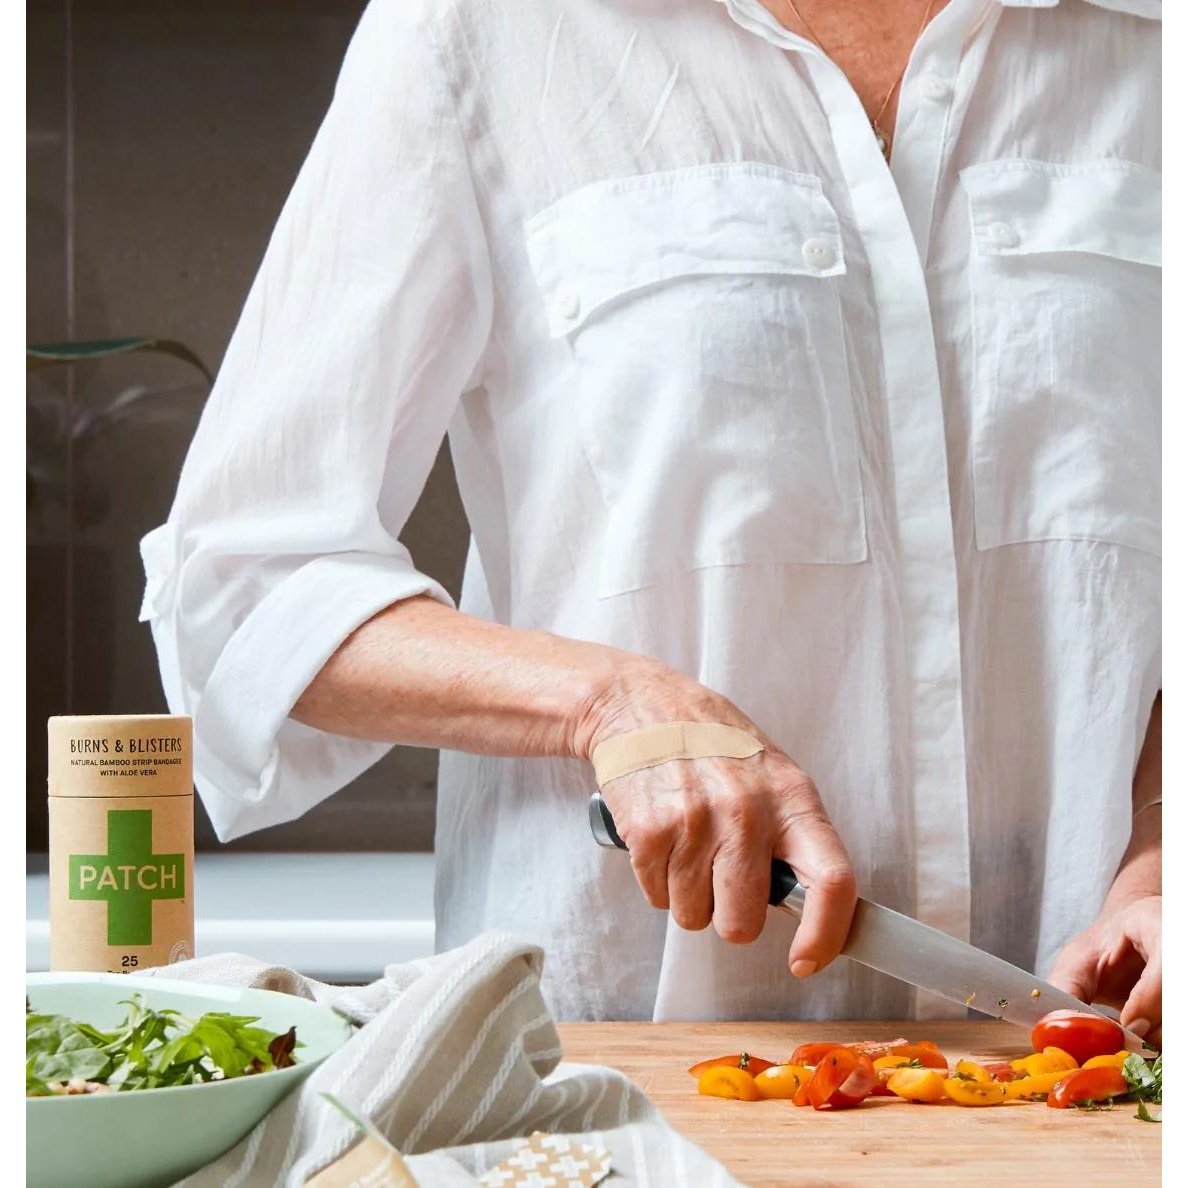 Patch natural aloe bandaid in use in kitchen